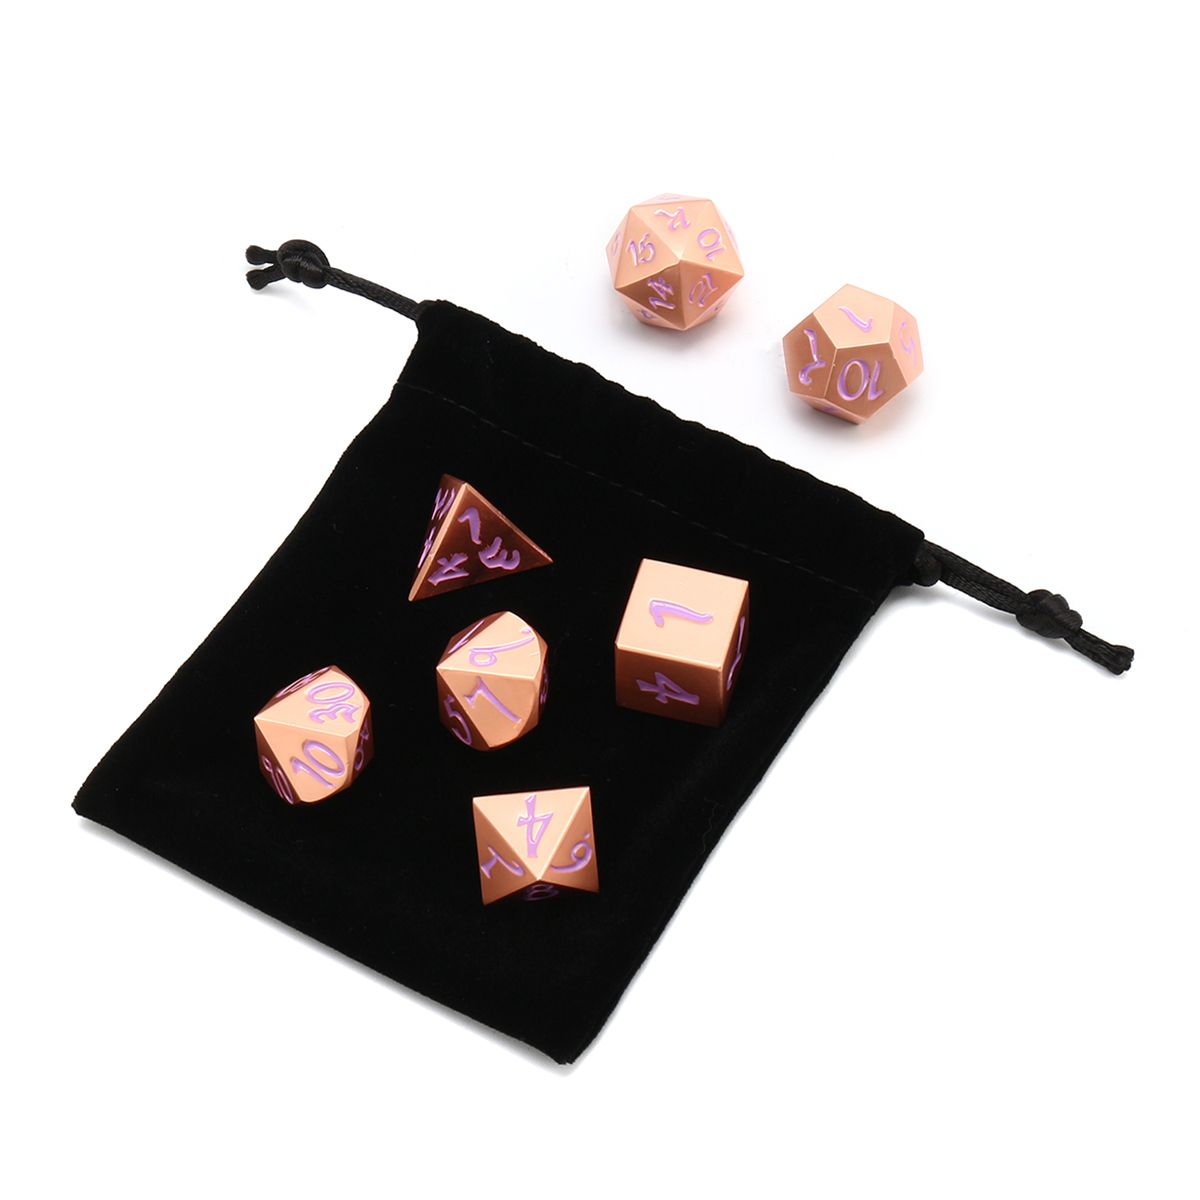 7Pcs-Antique-Metal-Polyhedral-Dice-Role-Playing-Game-Dices-Heavy-Duty-With-Bag-1320392